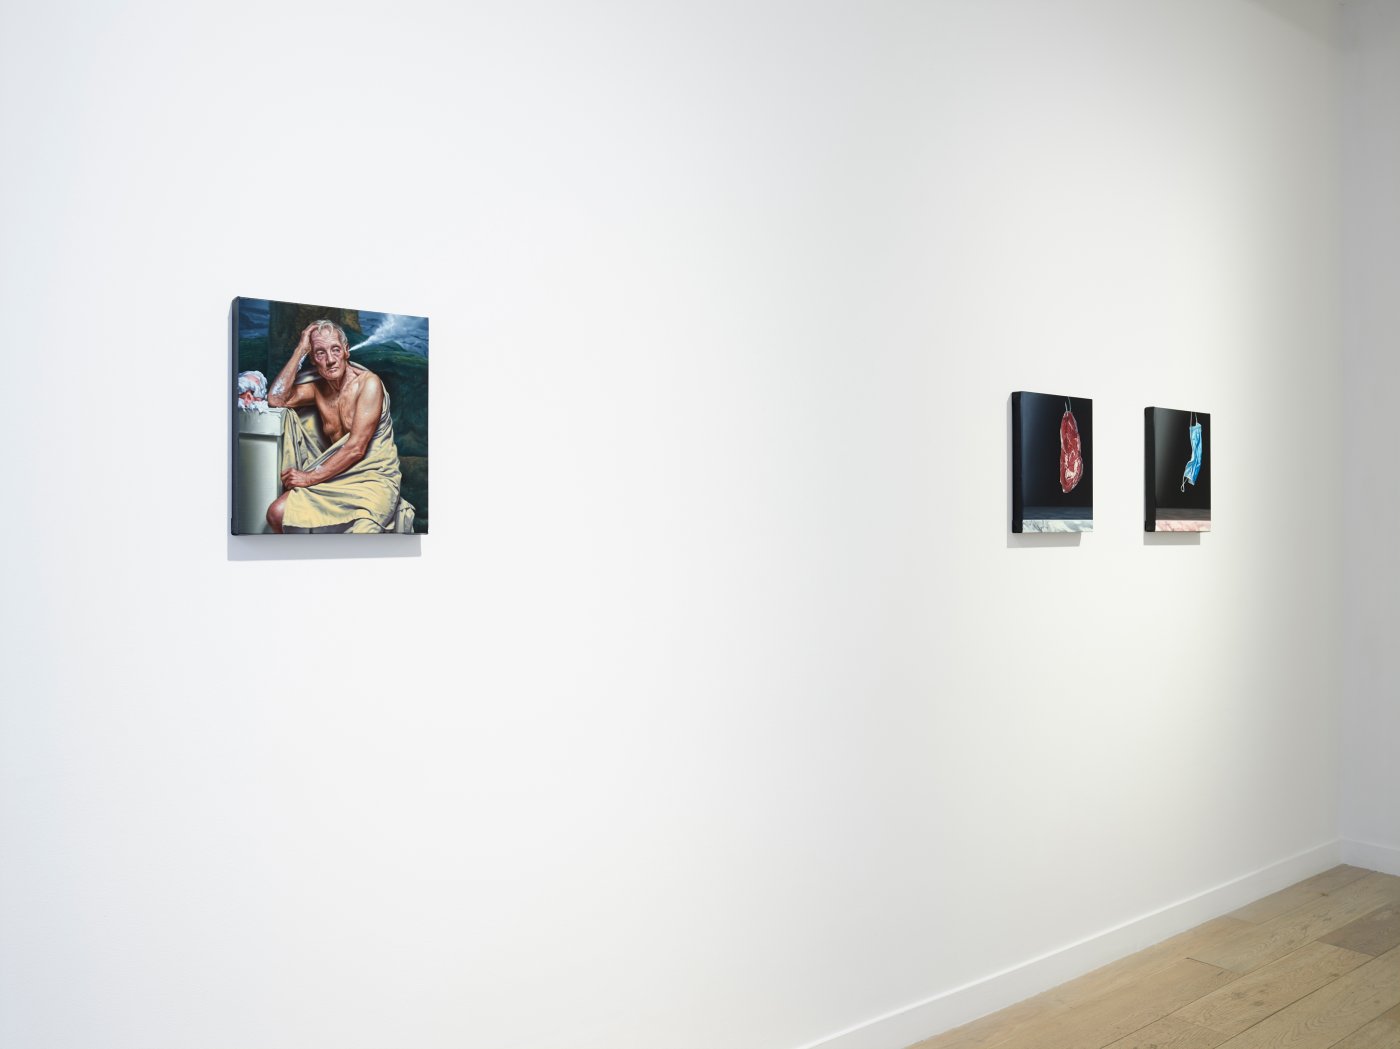 Installation image for Hynek Martinec: Will and Representation, at Parafin